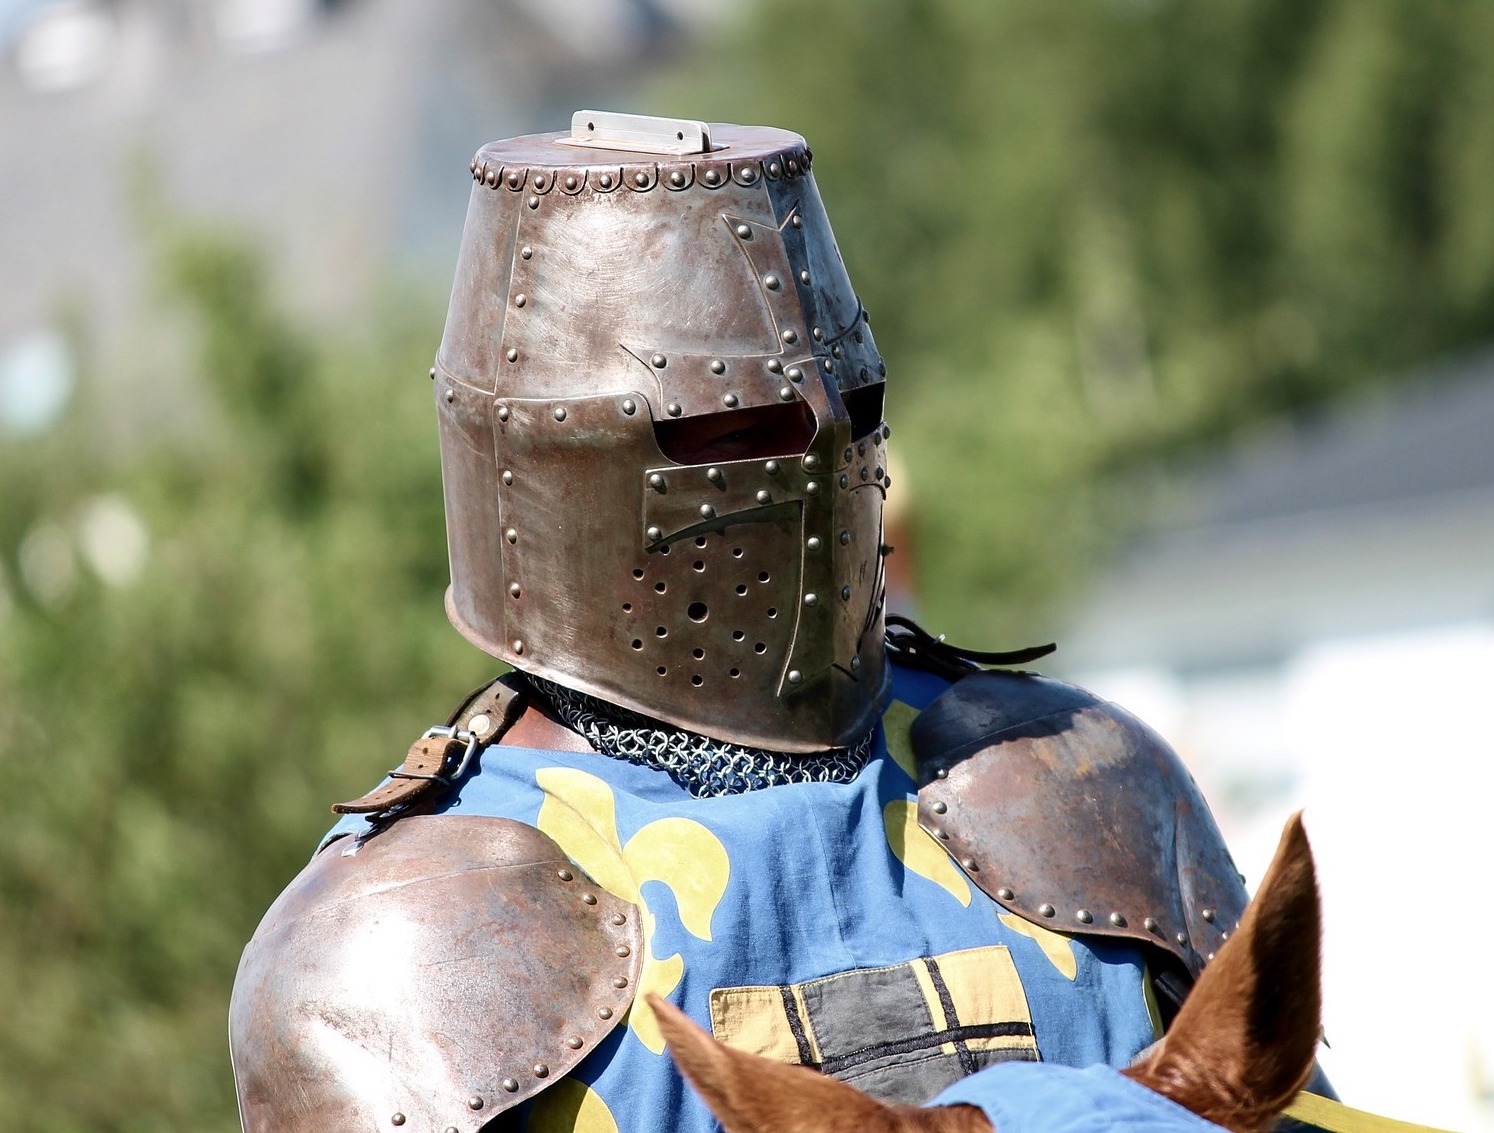 How can I make armor like this? I use a site called People